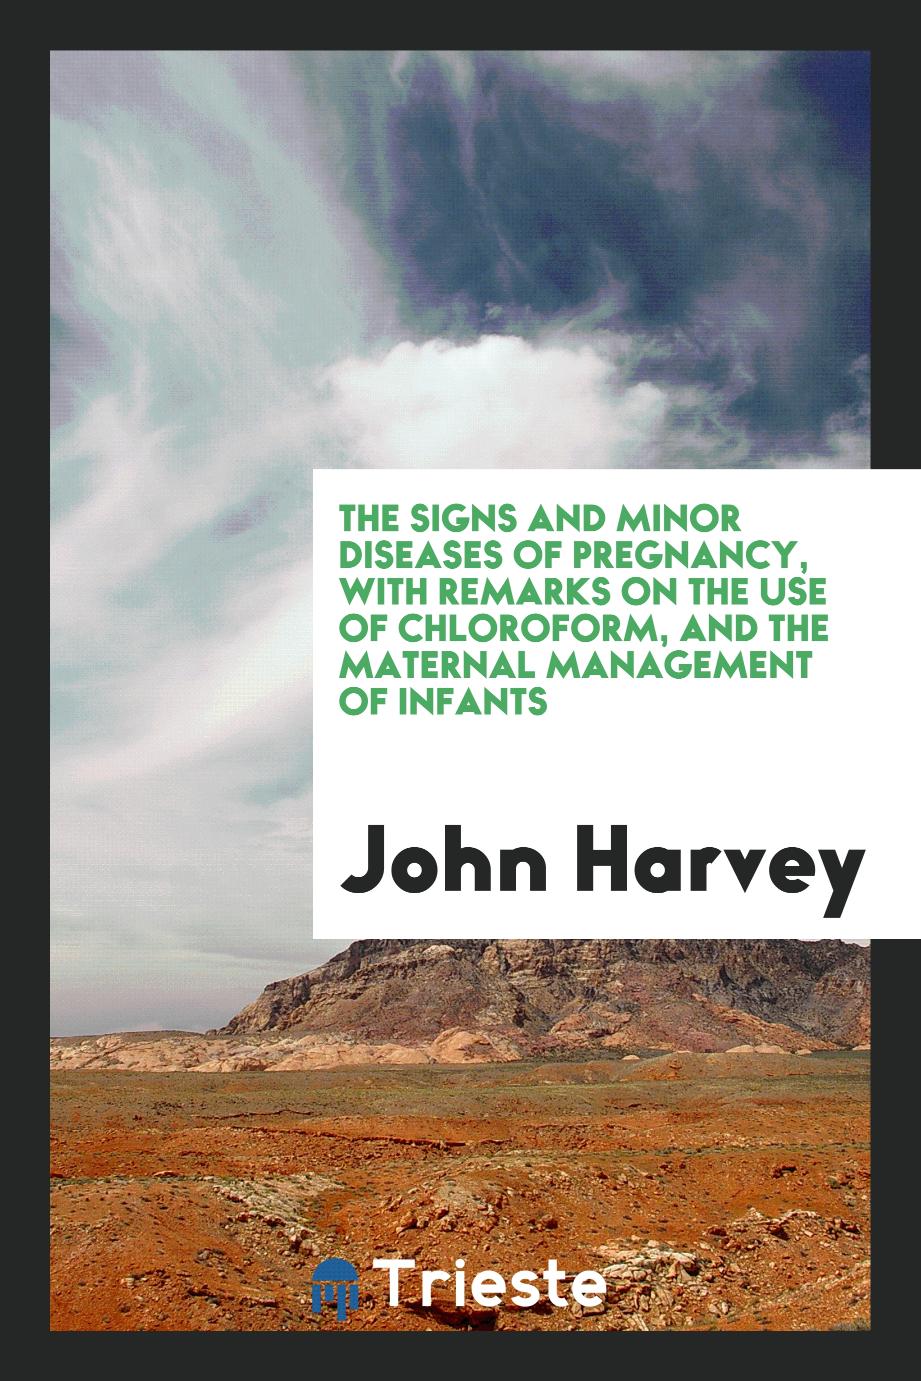 The Signs and Minor Diseases of Pregnancy, with Remarks on the Use of Chloroform, and the Maternal Management of Infants